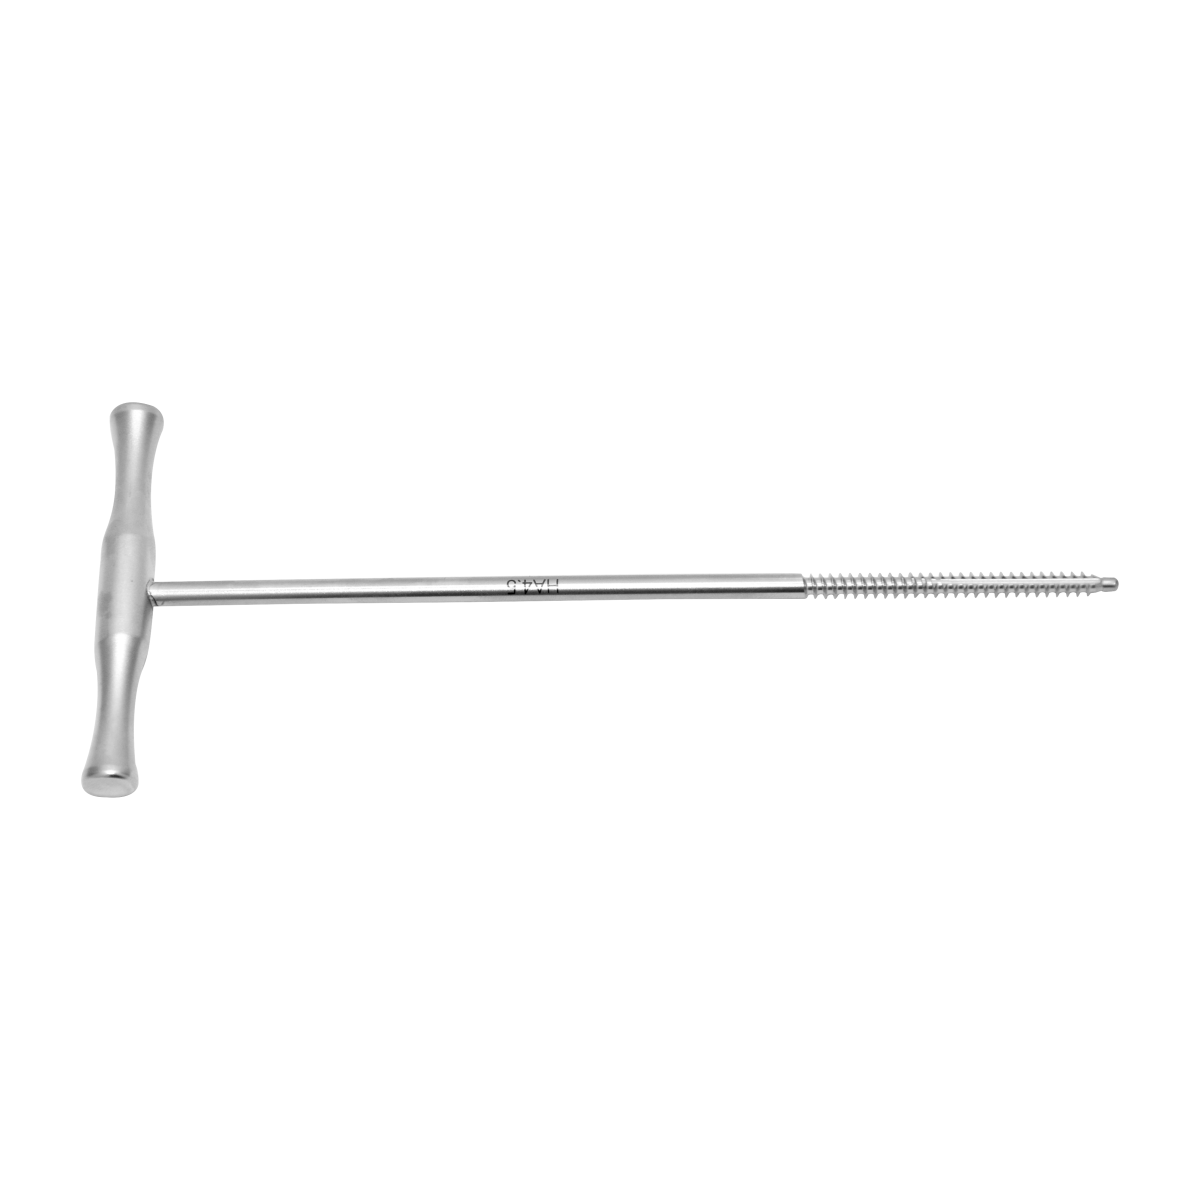 Bone Tap with T - Handle Dia. 4.5mm Thread Length 55mm, Total Length 175mm